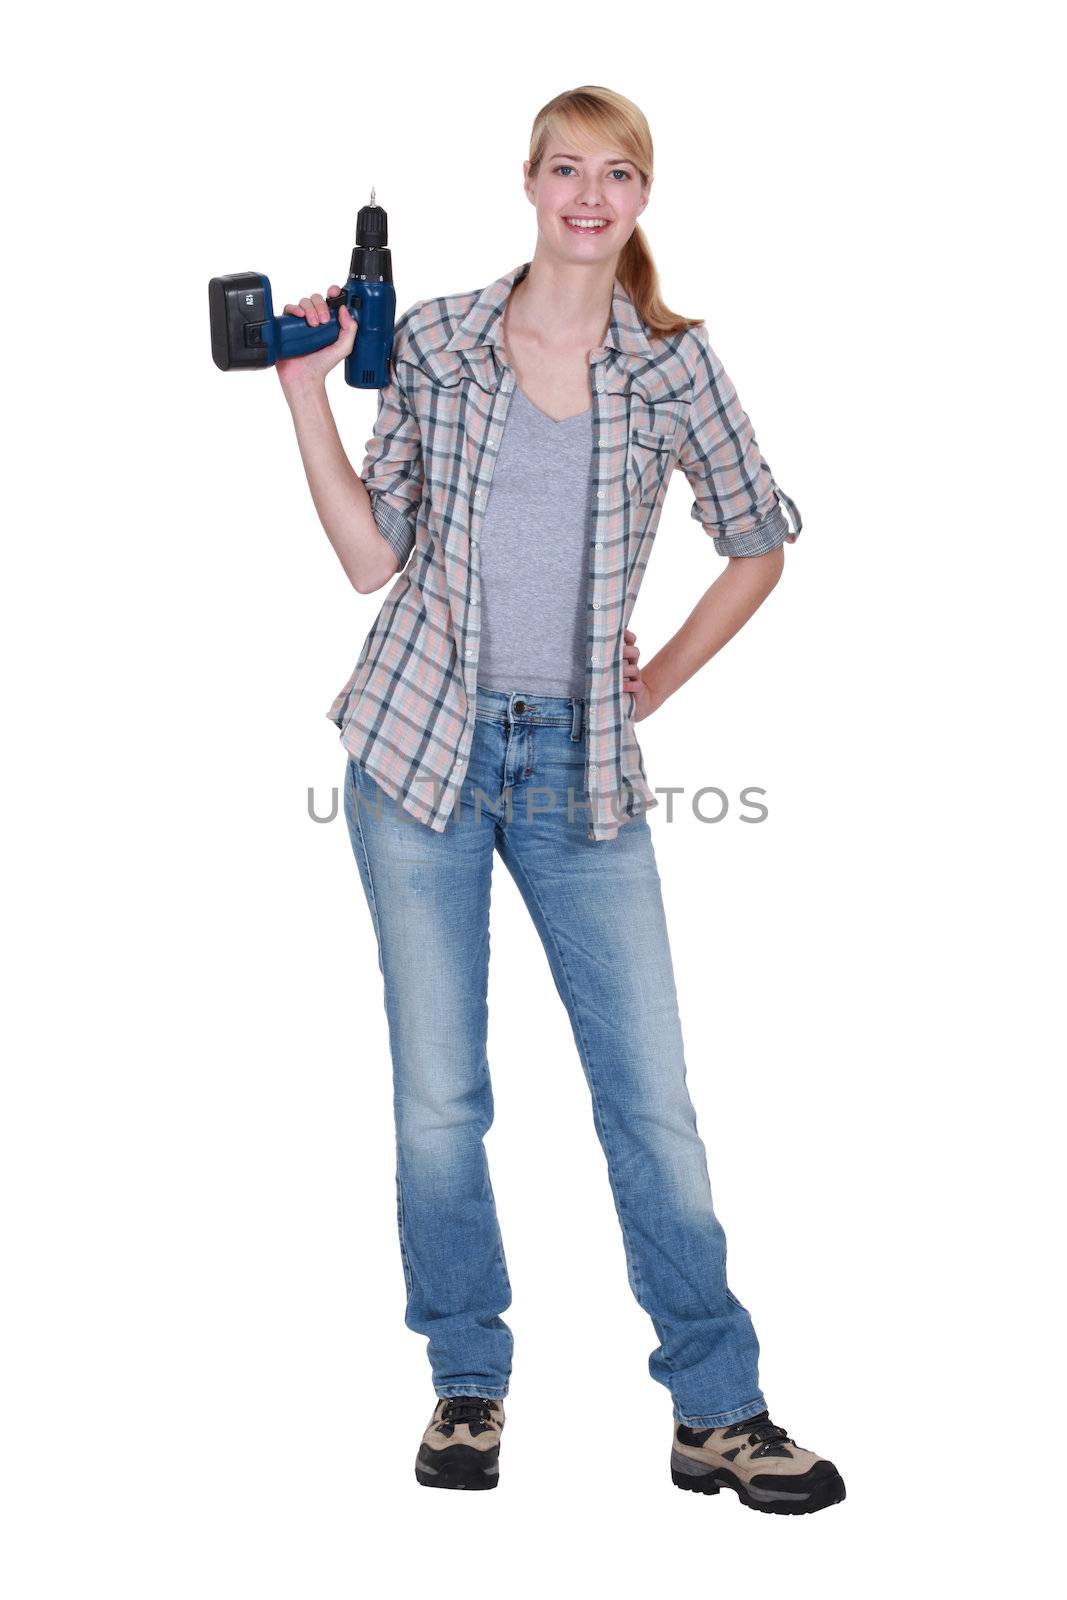 Blond woman stood with power drill by phovoir